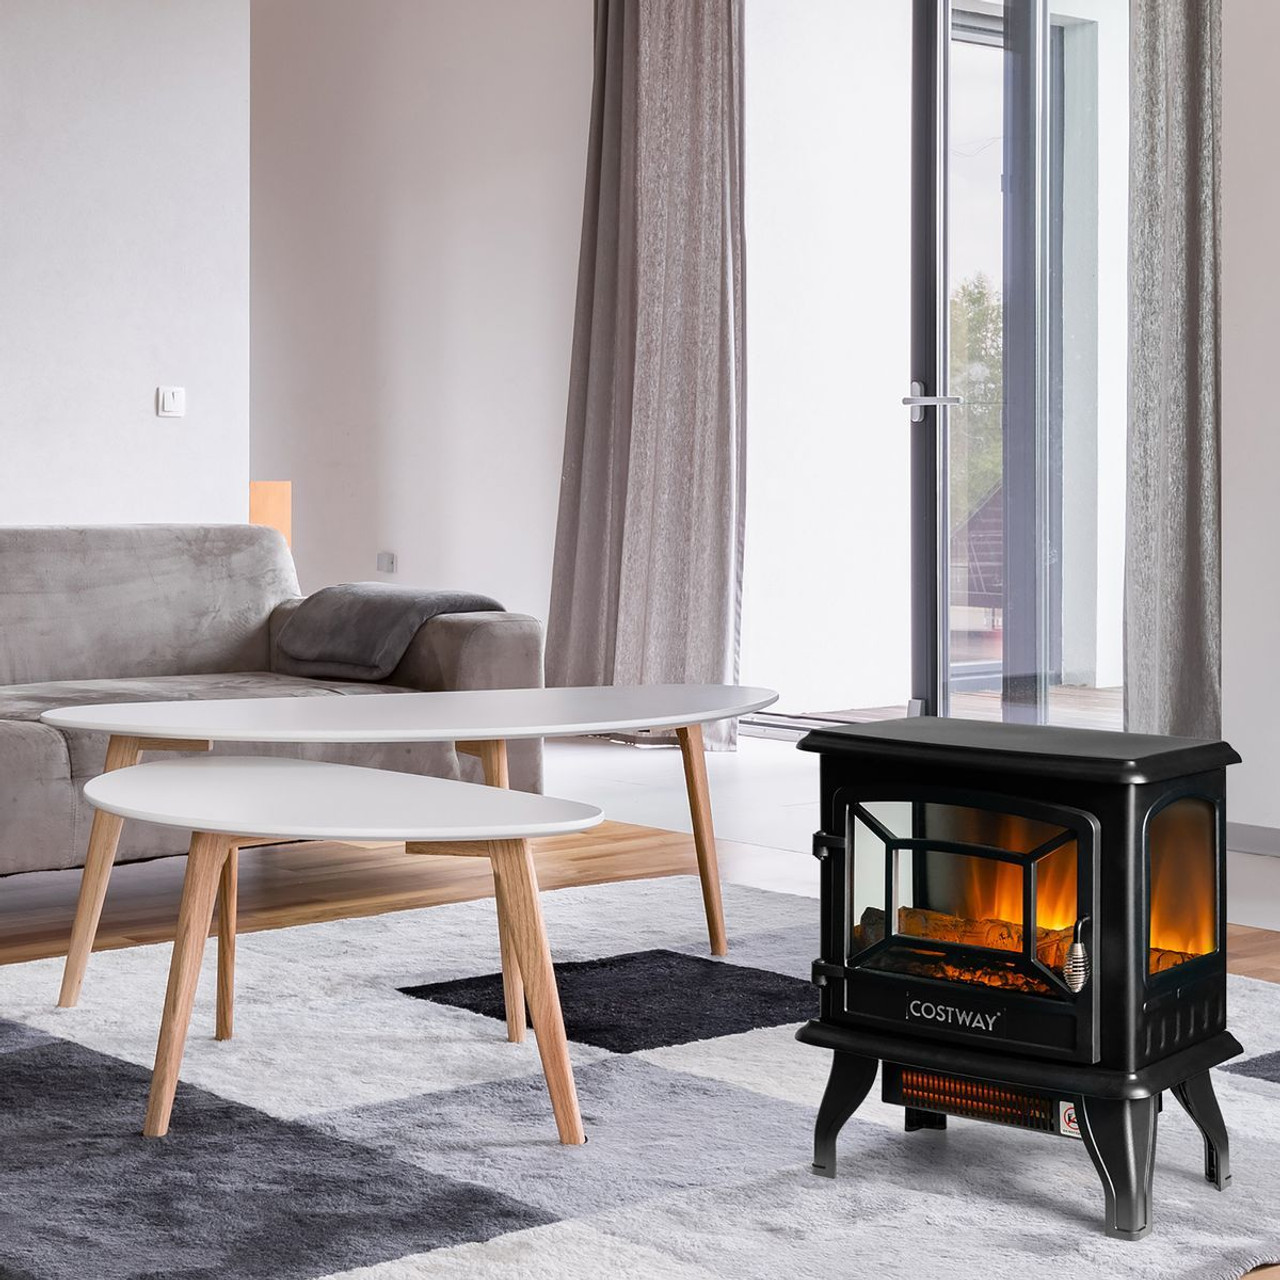 17-Inch Freestanding Electric Stove Fireplace Heater with 3-Side View product image